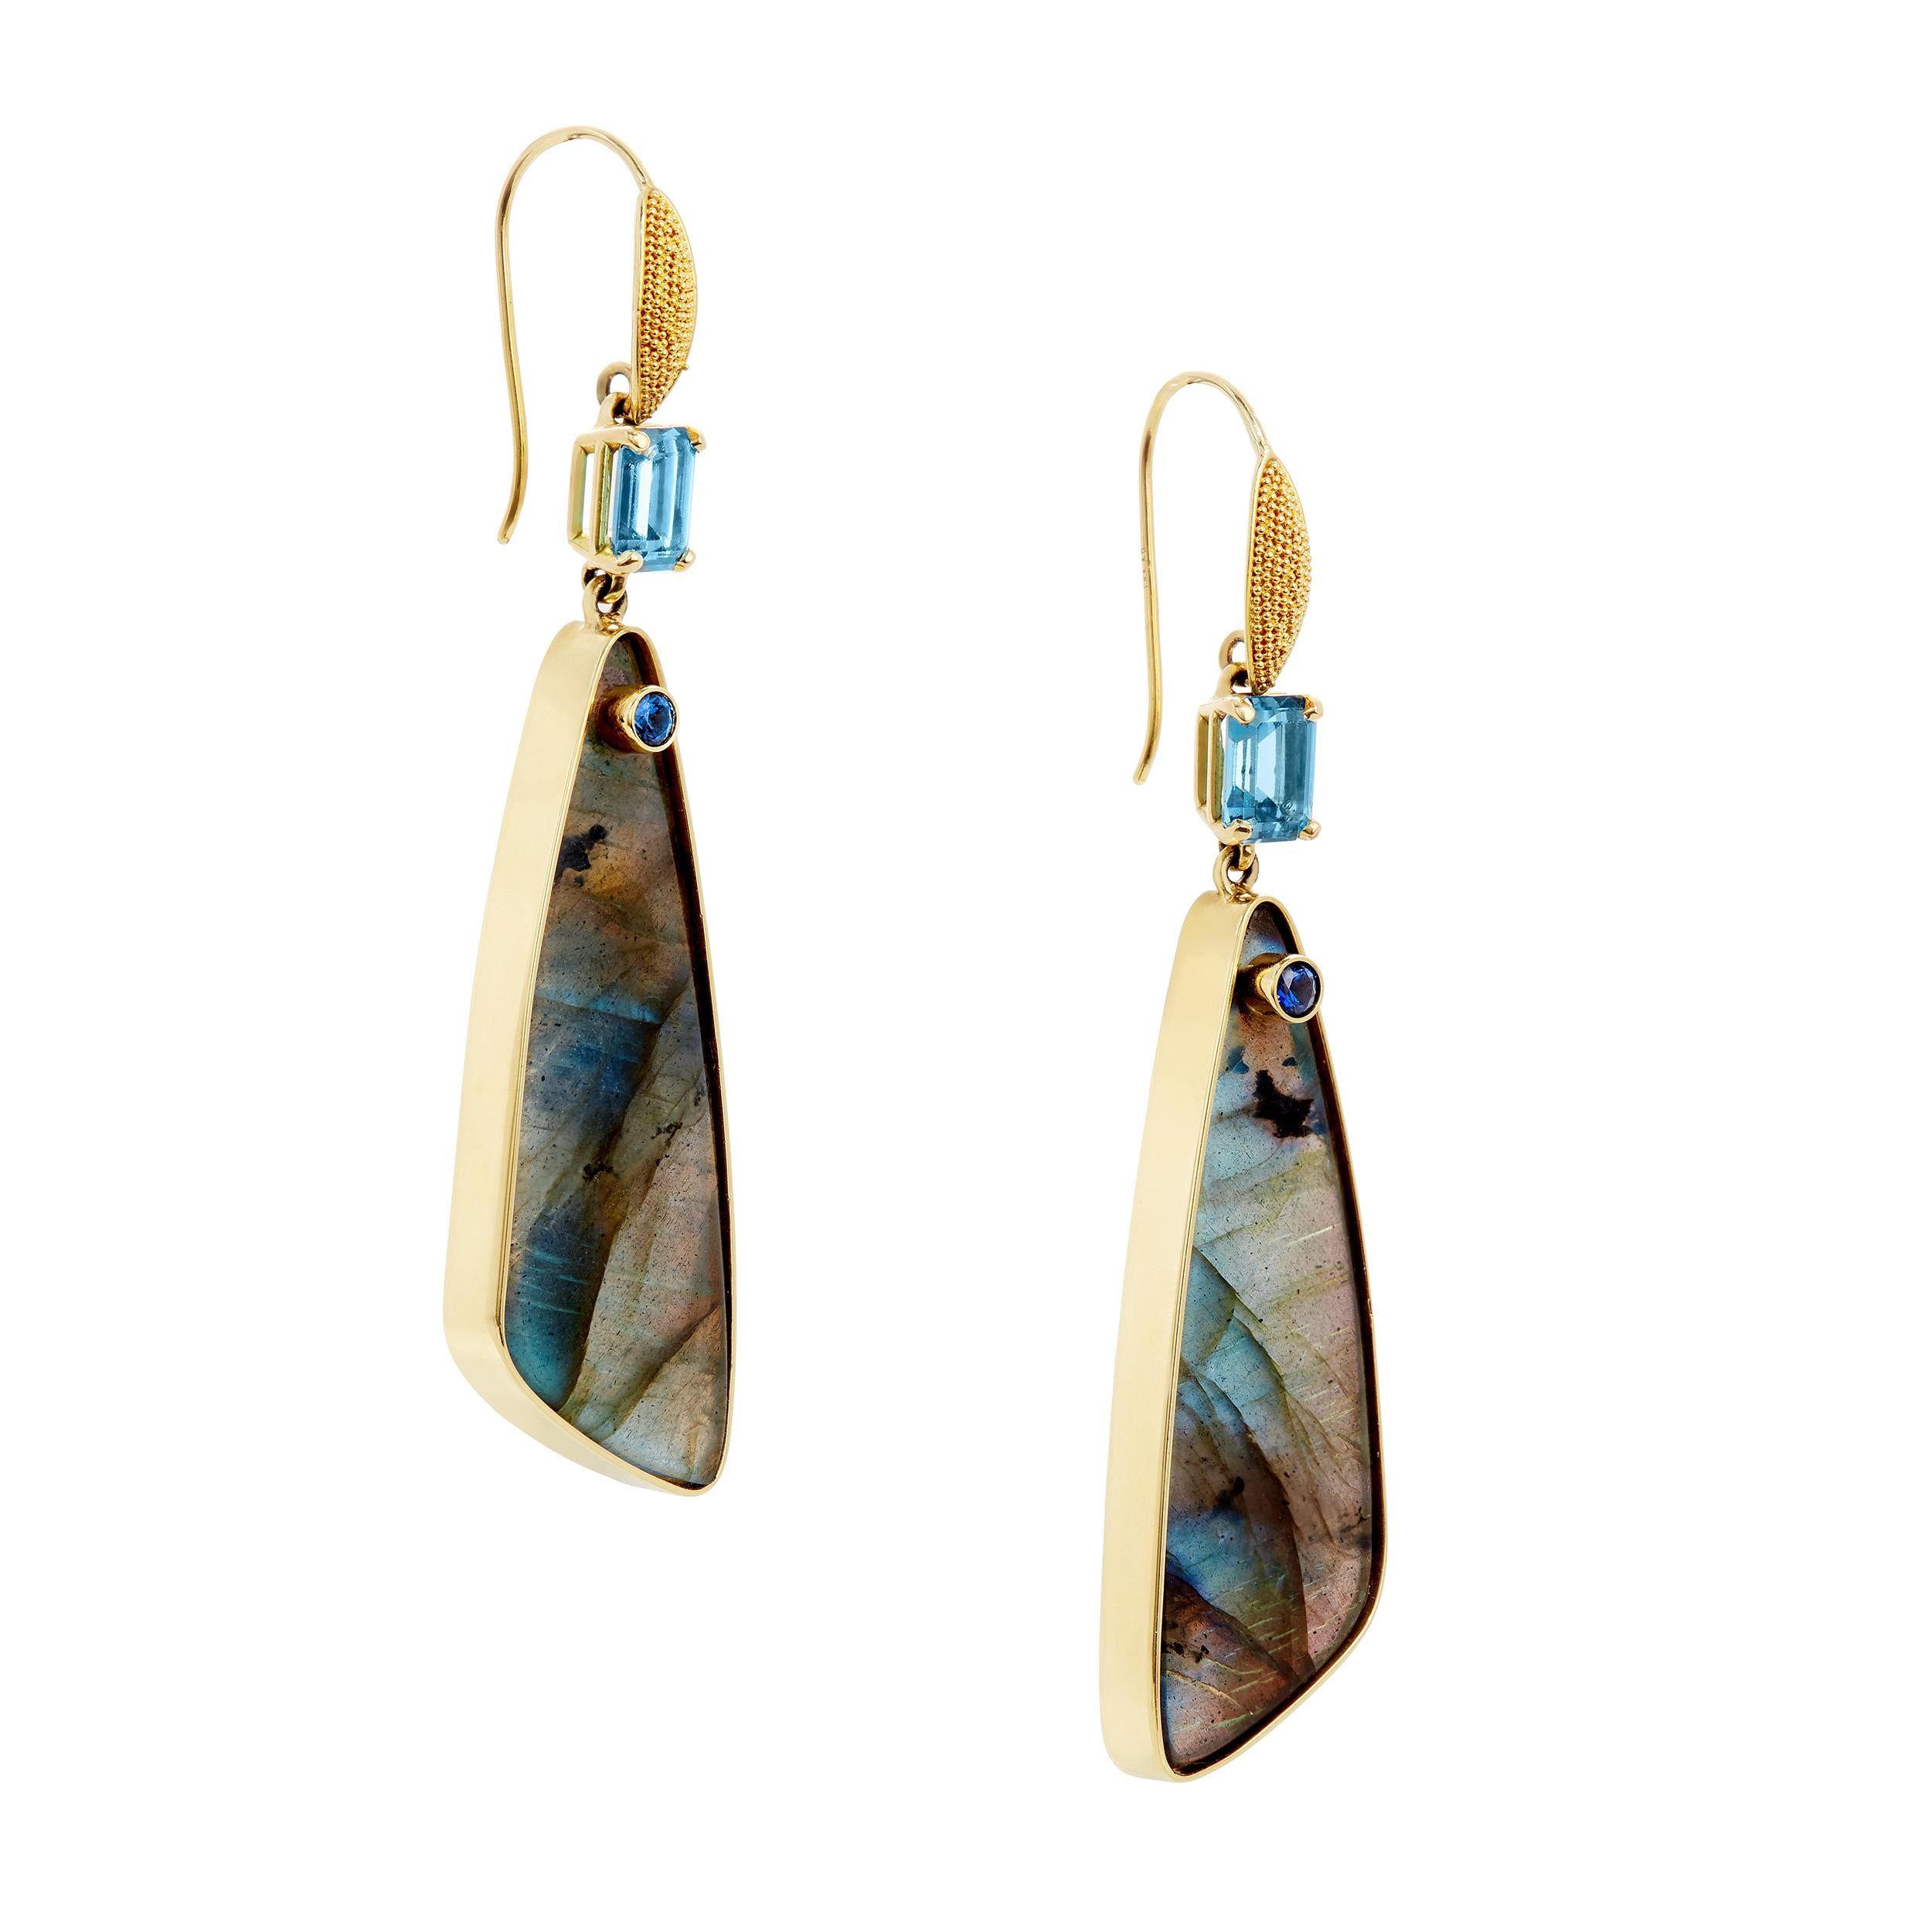 Sophisticated beauty. These are gorgeous earrings that dangle with flowing movement. Perfect for any occasion from casual to evening wear.

Trillion Labradorite (2) 14 x 41 mm 24.64 Carats
Emerald Cut London Blue Topaz (2) 2.48 Carats
Blue Sapphires